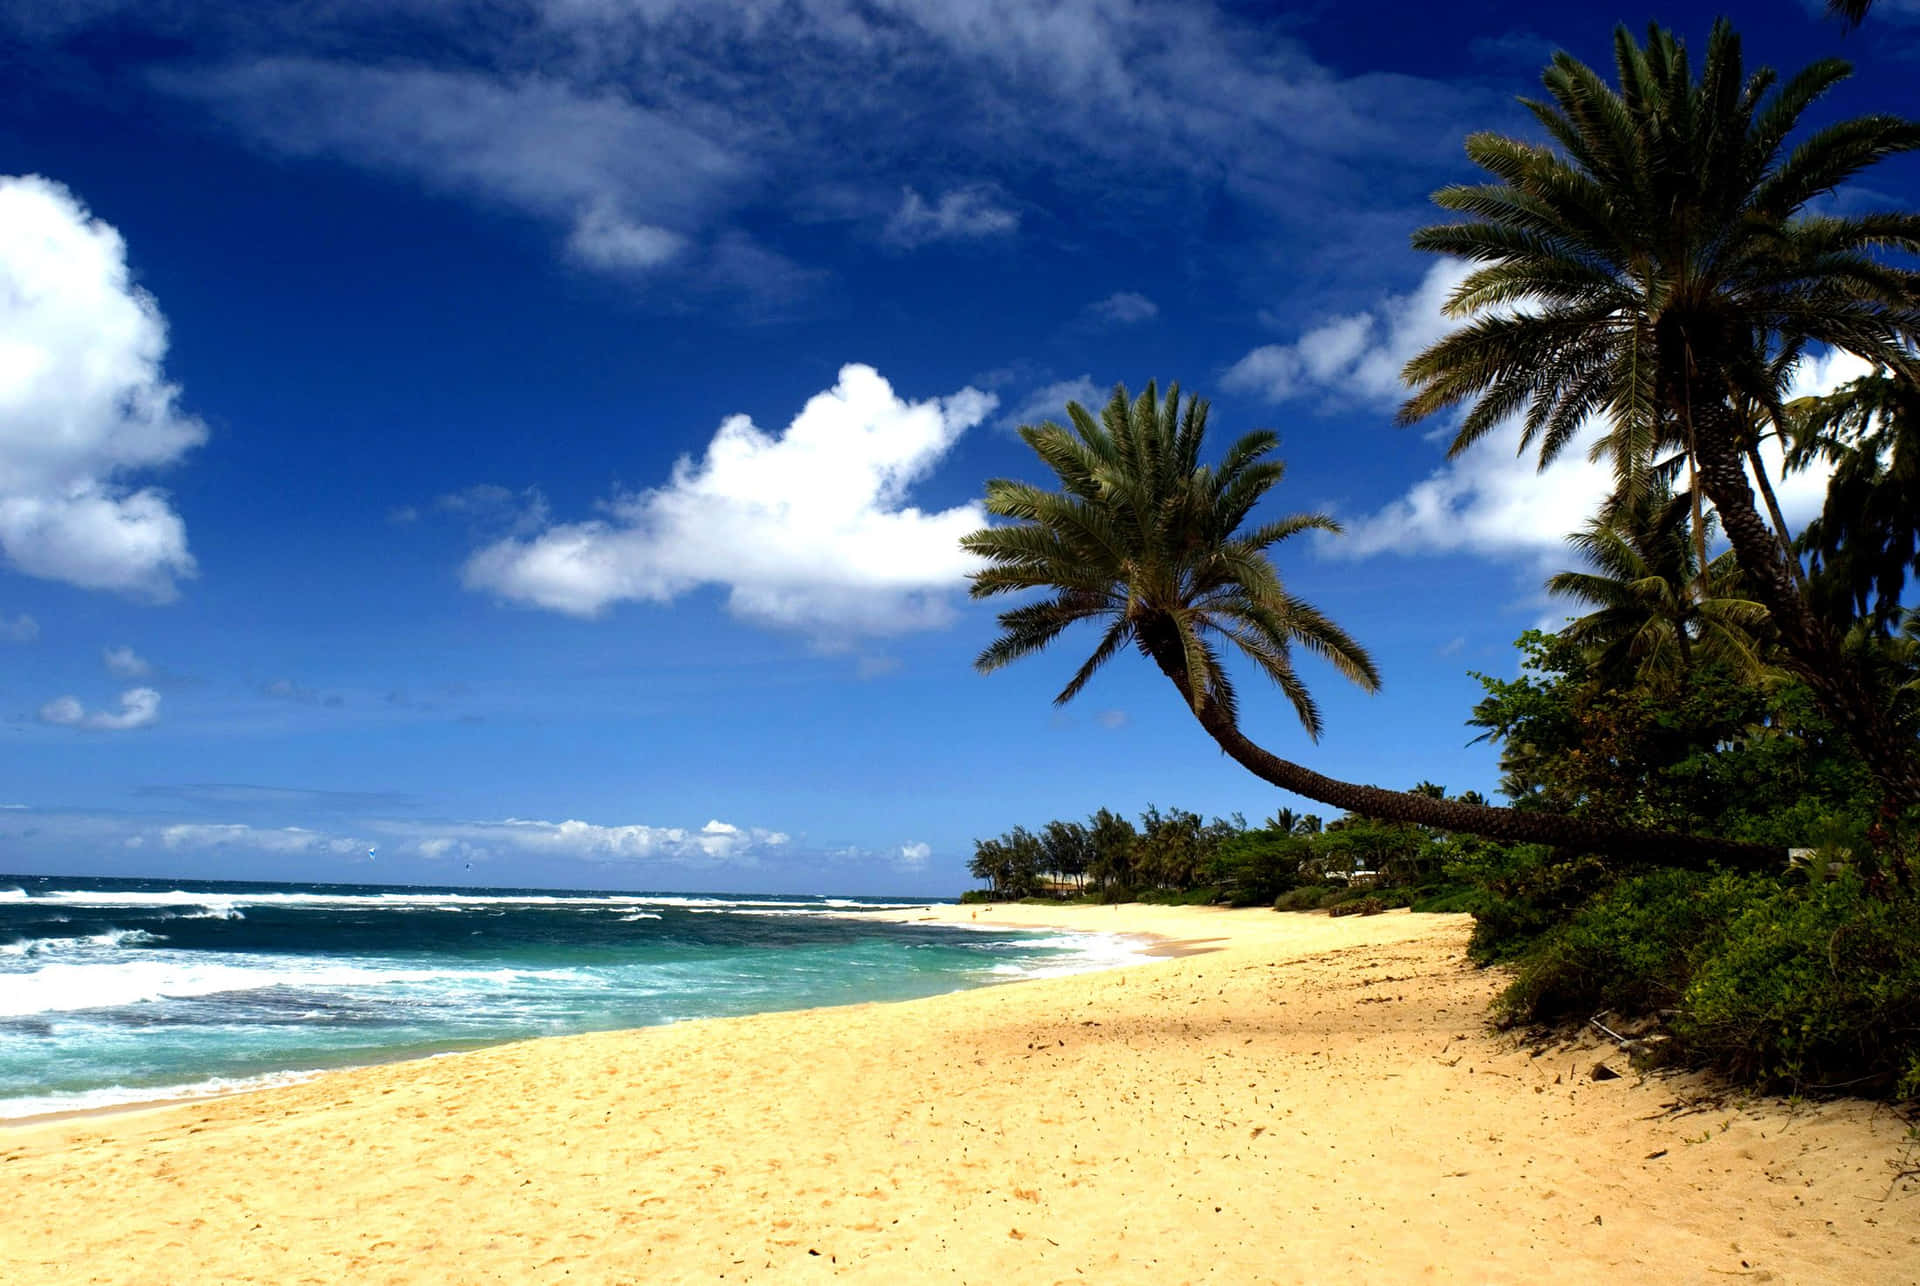 Relax on the sandy beaches of Hawaii and feel tropical sun rays warming your skin. Wallpaper